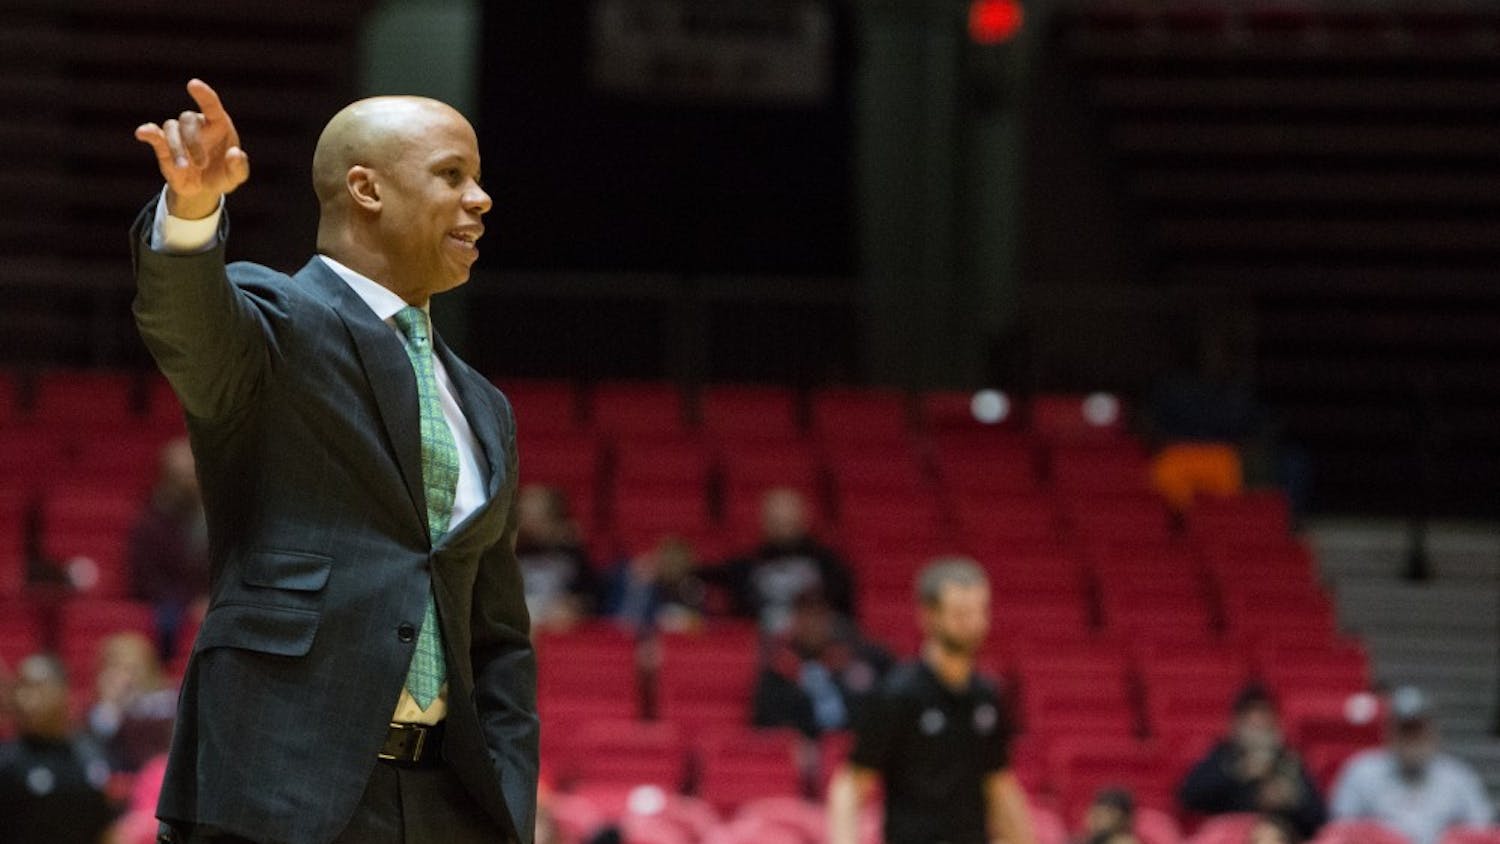 Eastern Michigan head coach Rob Murphy calls out the play in the Eagles 61-59 double overtime loss to Northern Illinois Thursday in Dekalb.